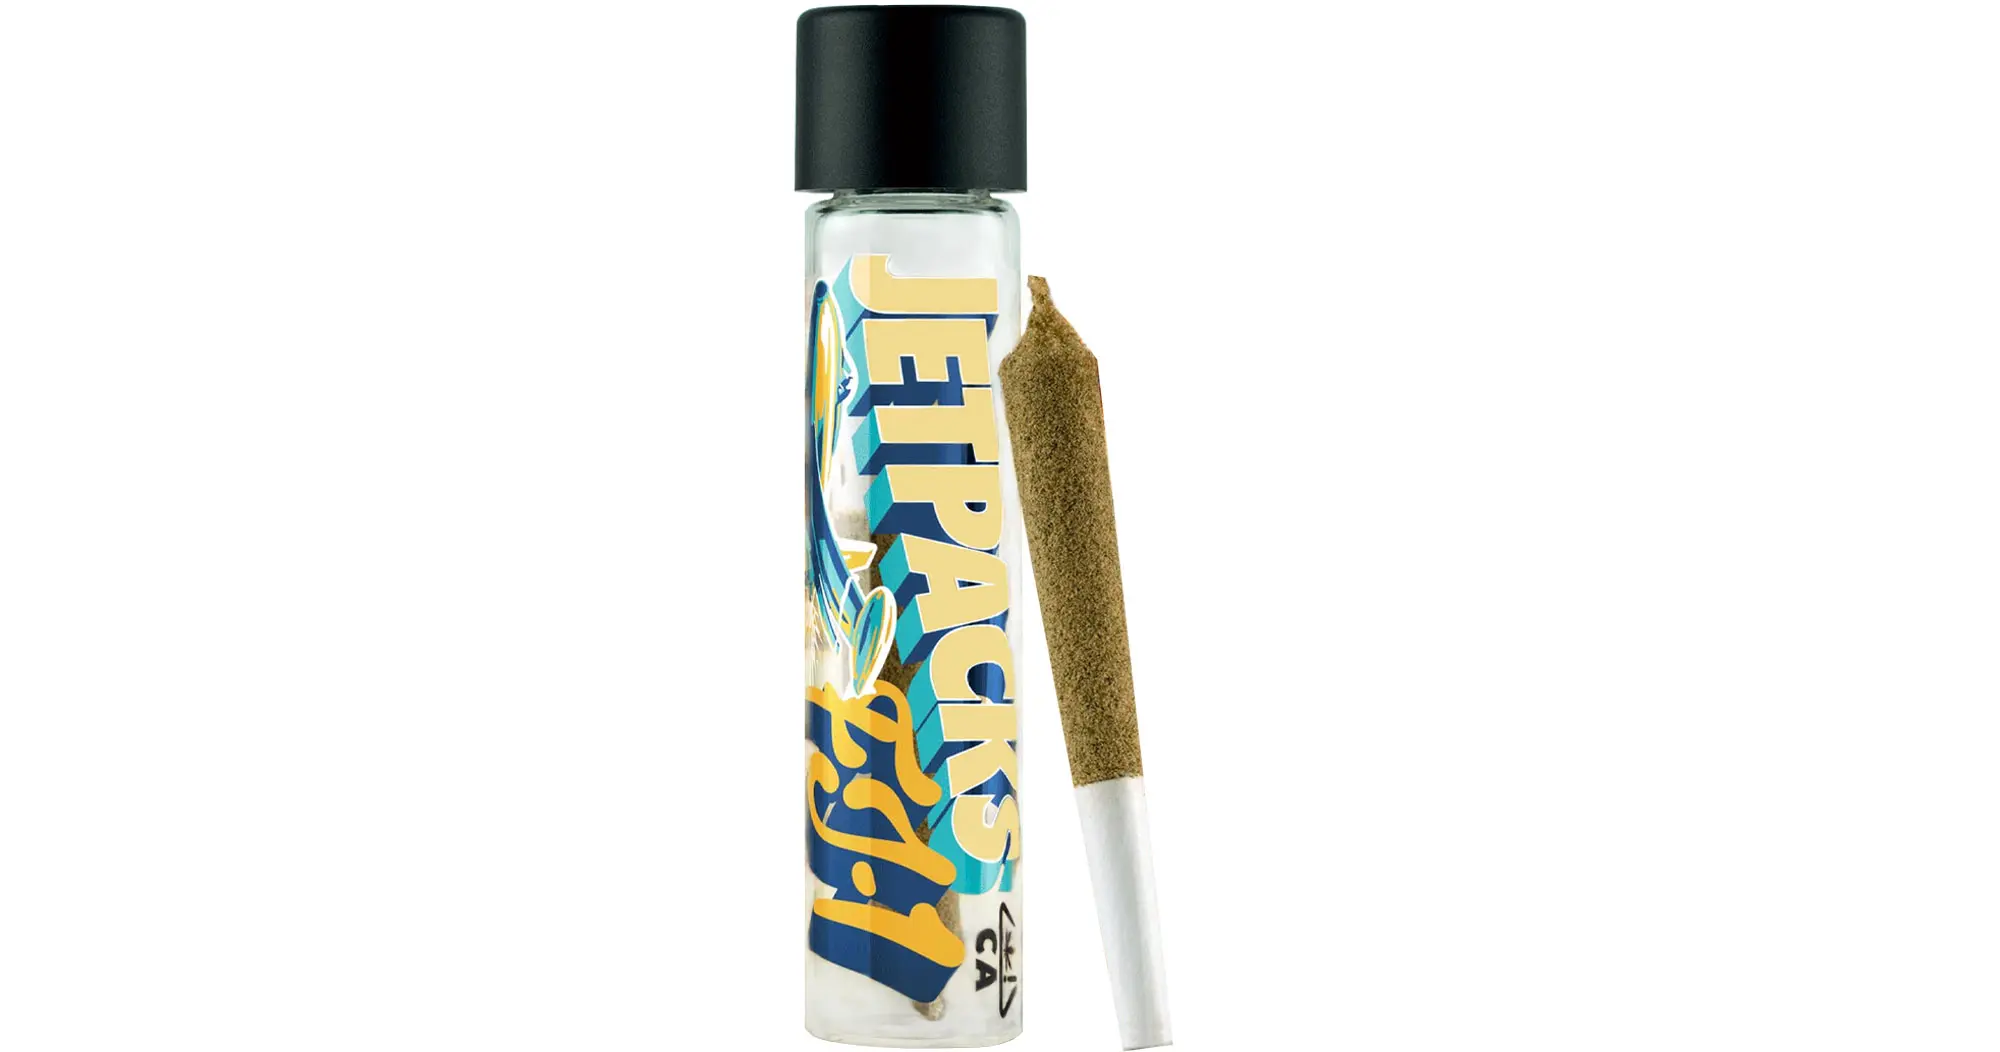 FJ-1 Infused Tropical Punch Pre-Roll